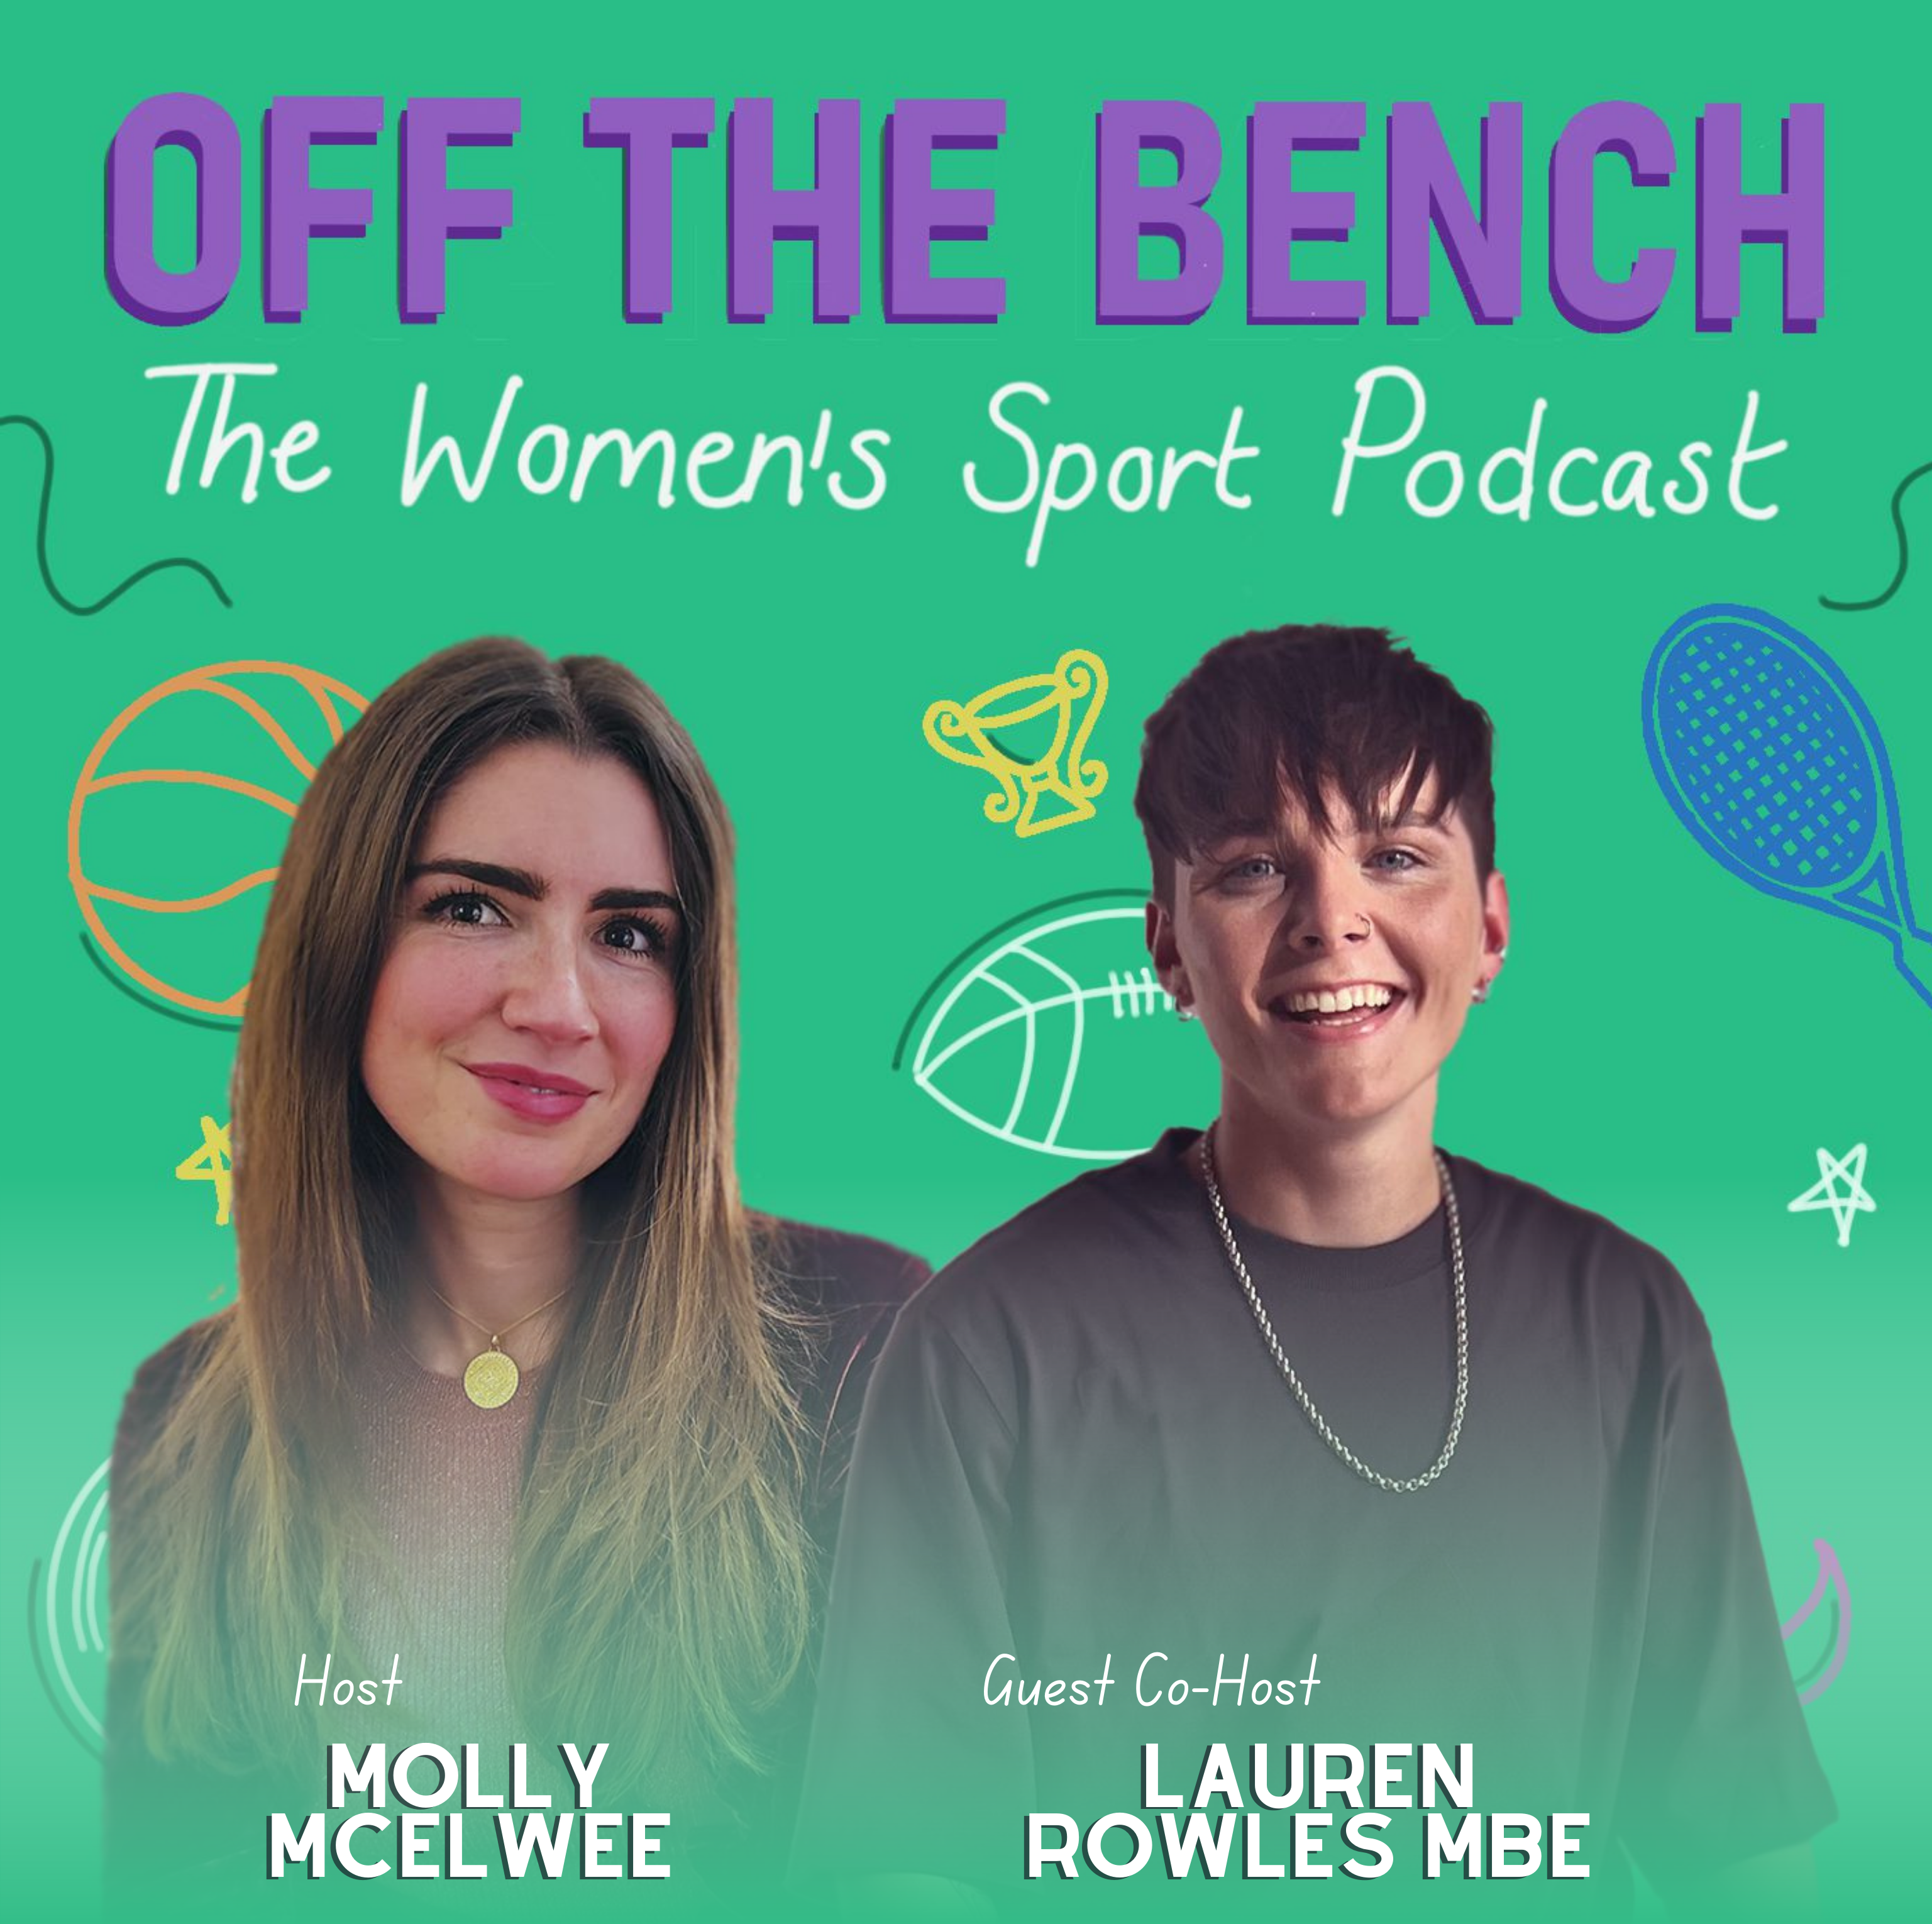 Off The Bench: The Women’s Sport Podcast